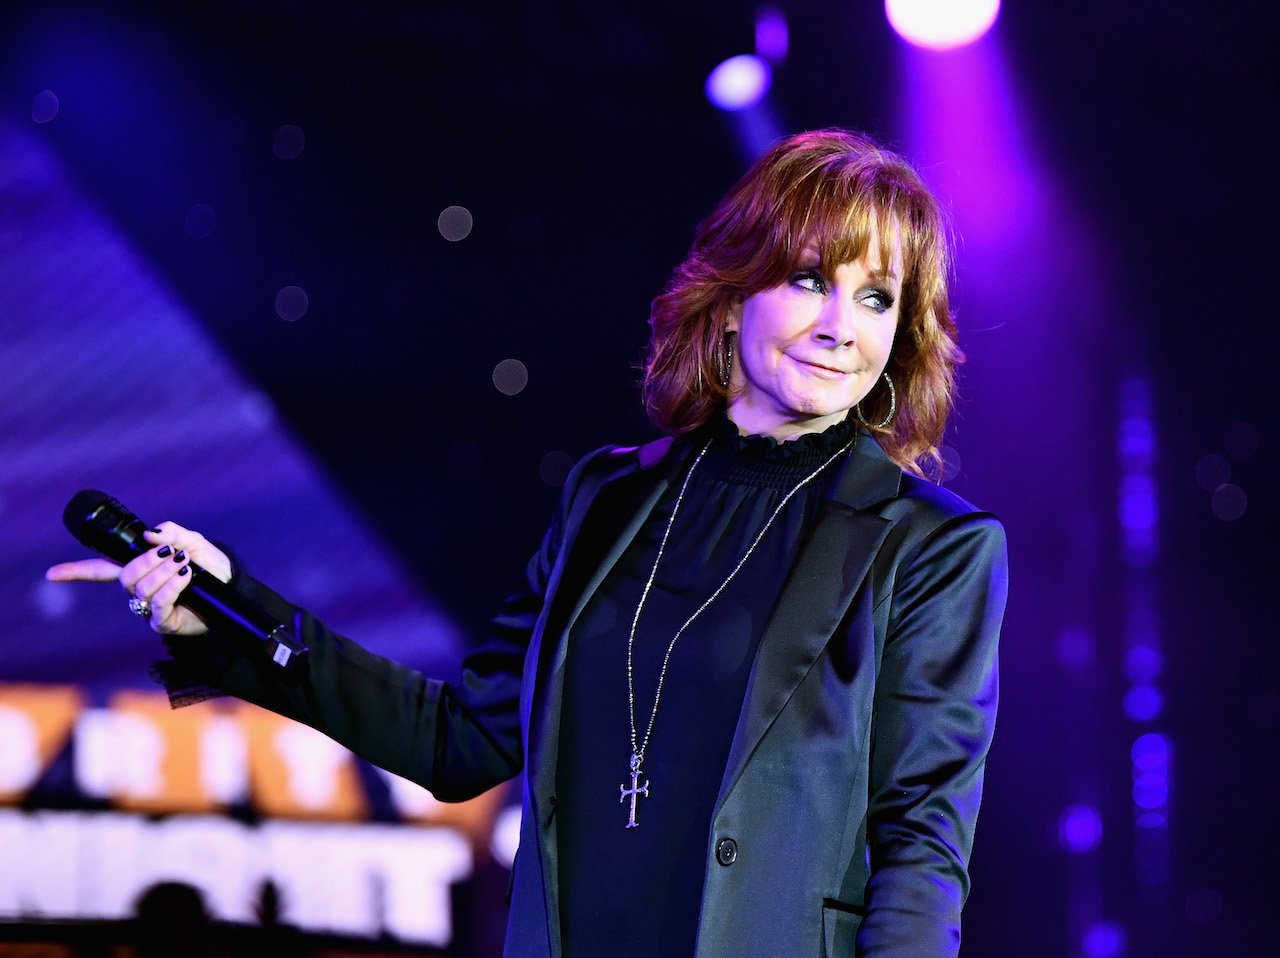 Reba McEntire speaks onstage at Celebrity Fight Night XXIV on March 10, 2018